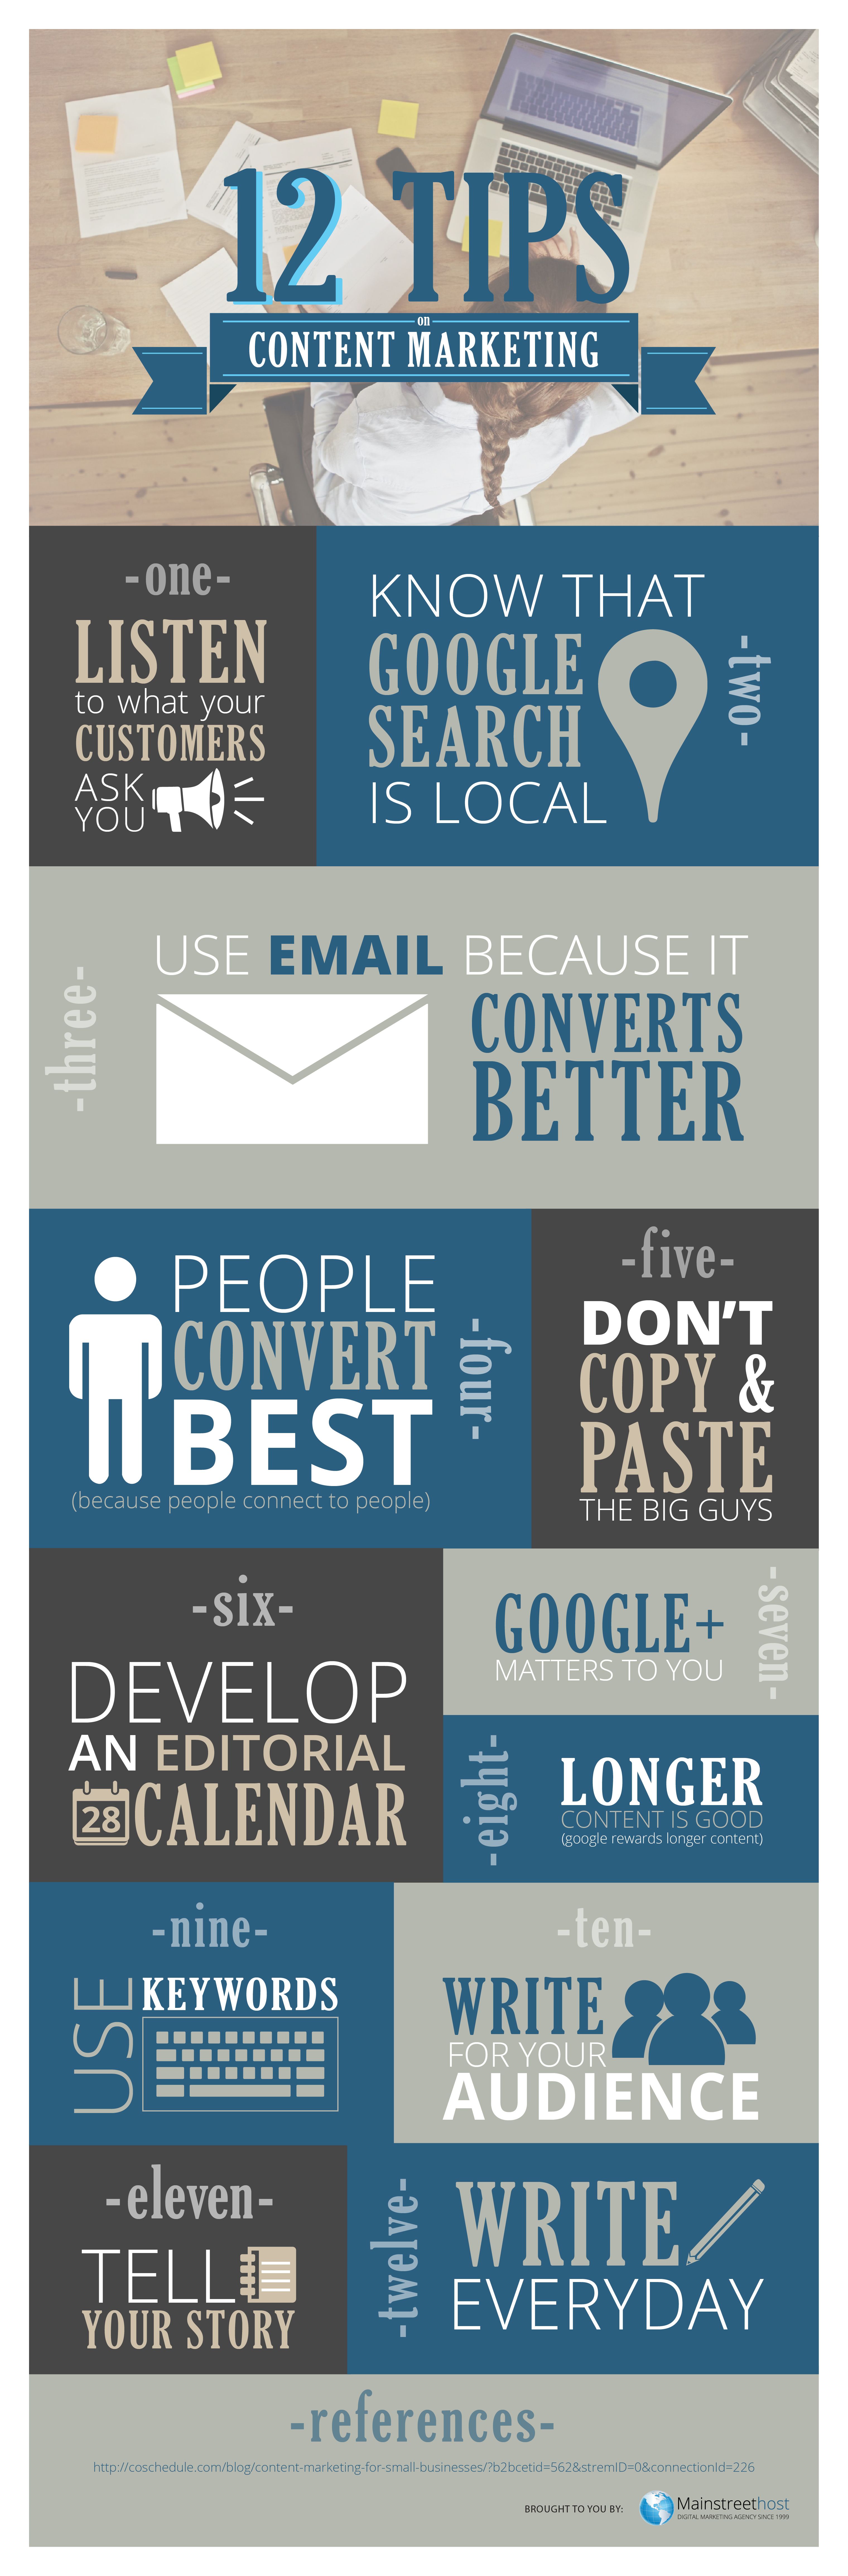 Content Marketing Infographic